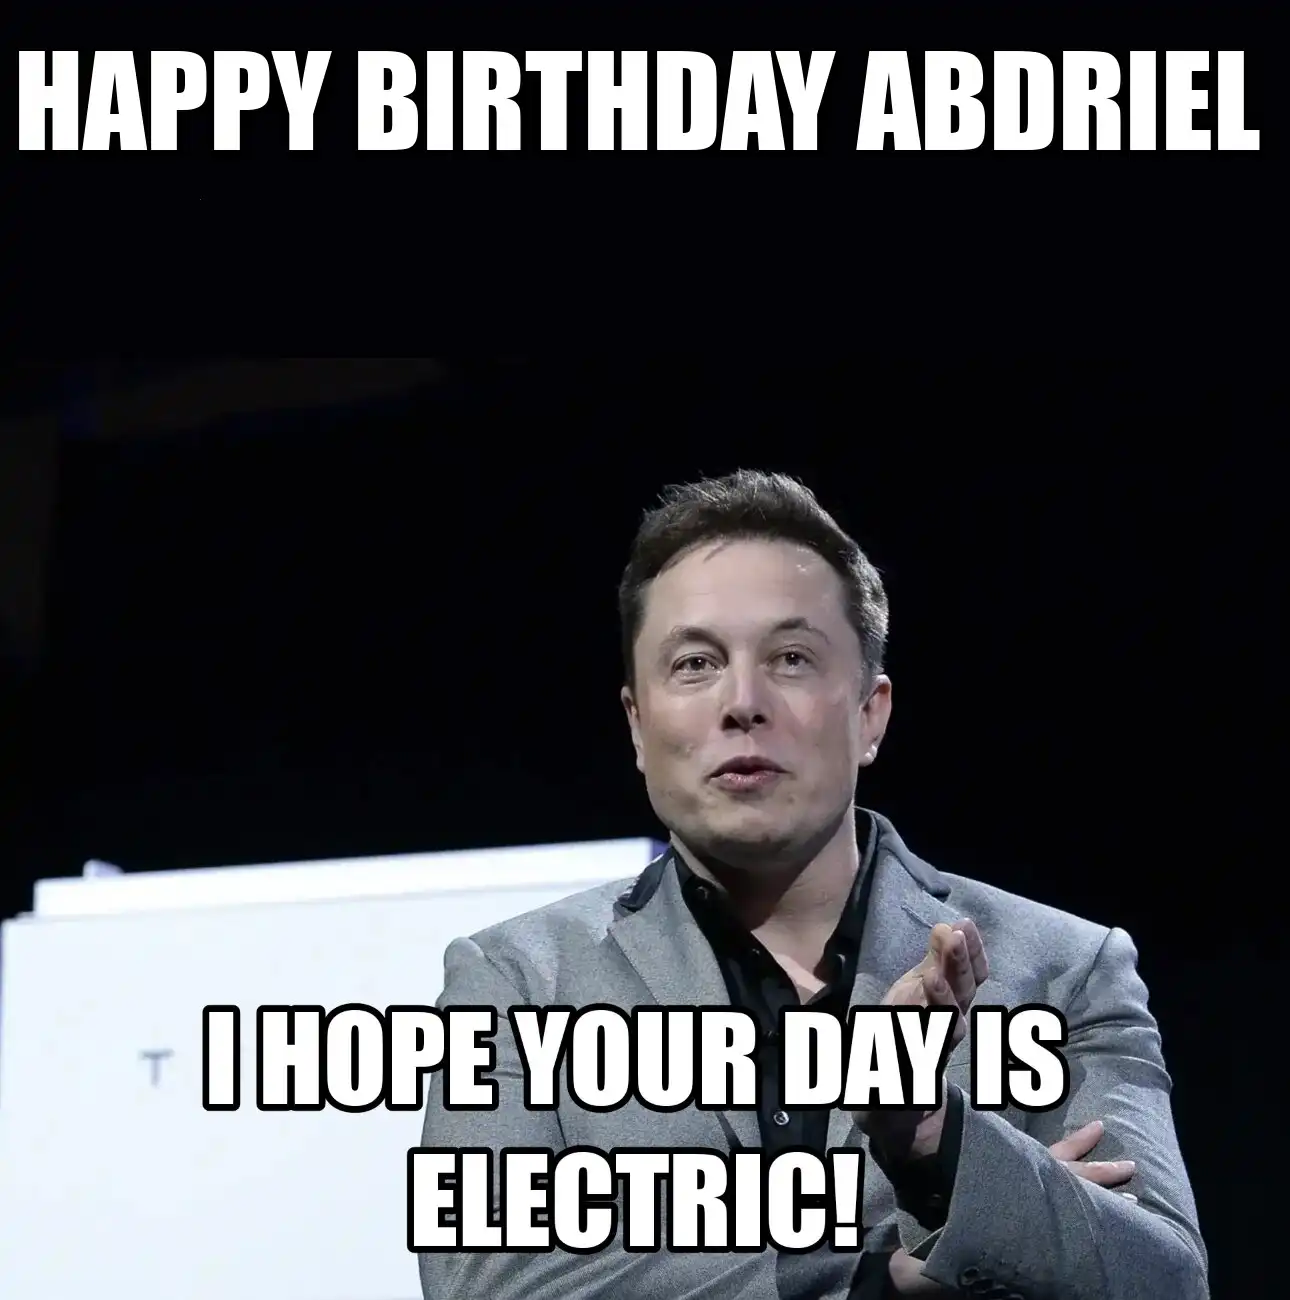 Happy Birthday Abdriel I Hope Your Day Is Electric Meme